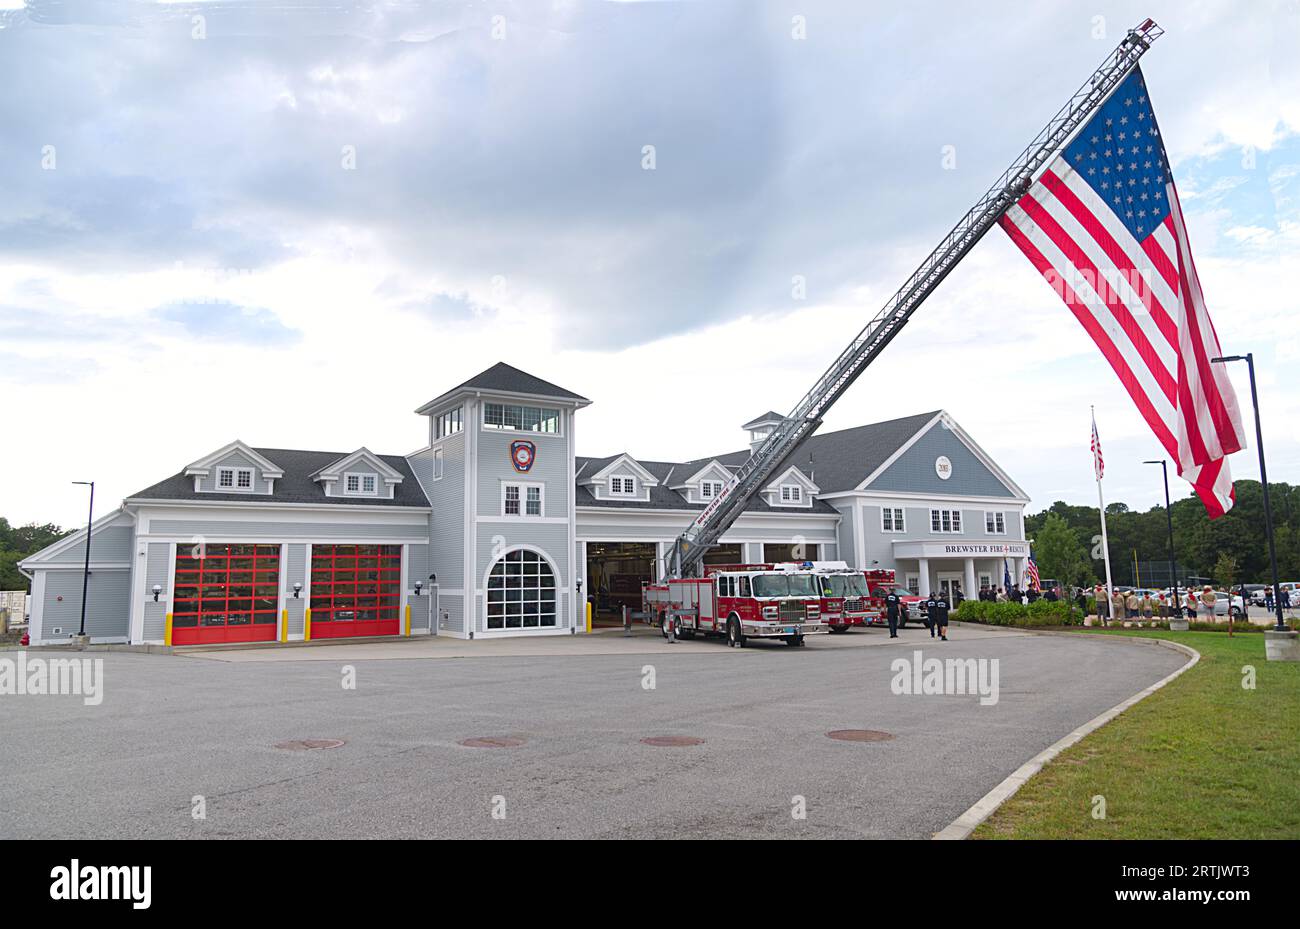 911 commemoration ceremony at Brewster, MA Fire Headquarters on Cape Cod, USA.   Brewster Fire Headquarters with large American Flag on display. Stock Photo